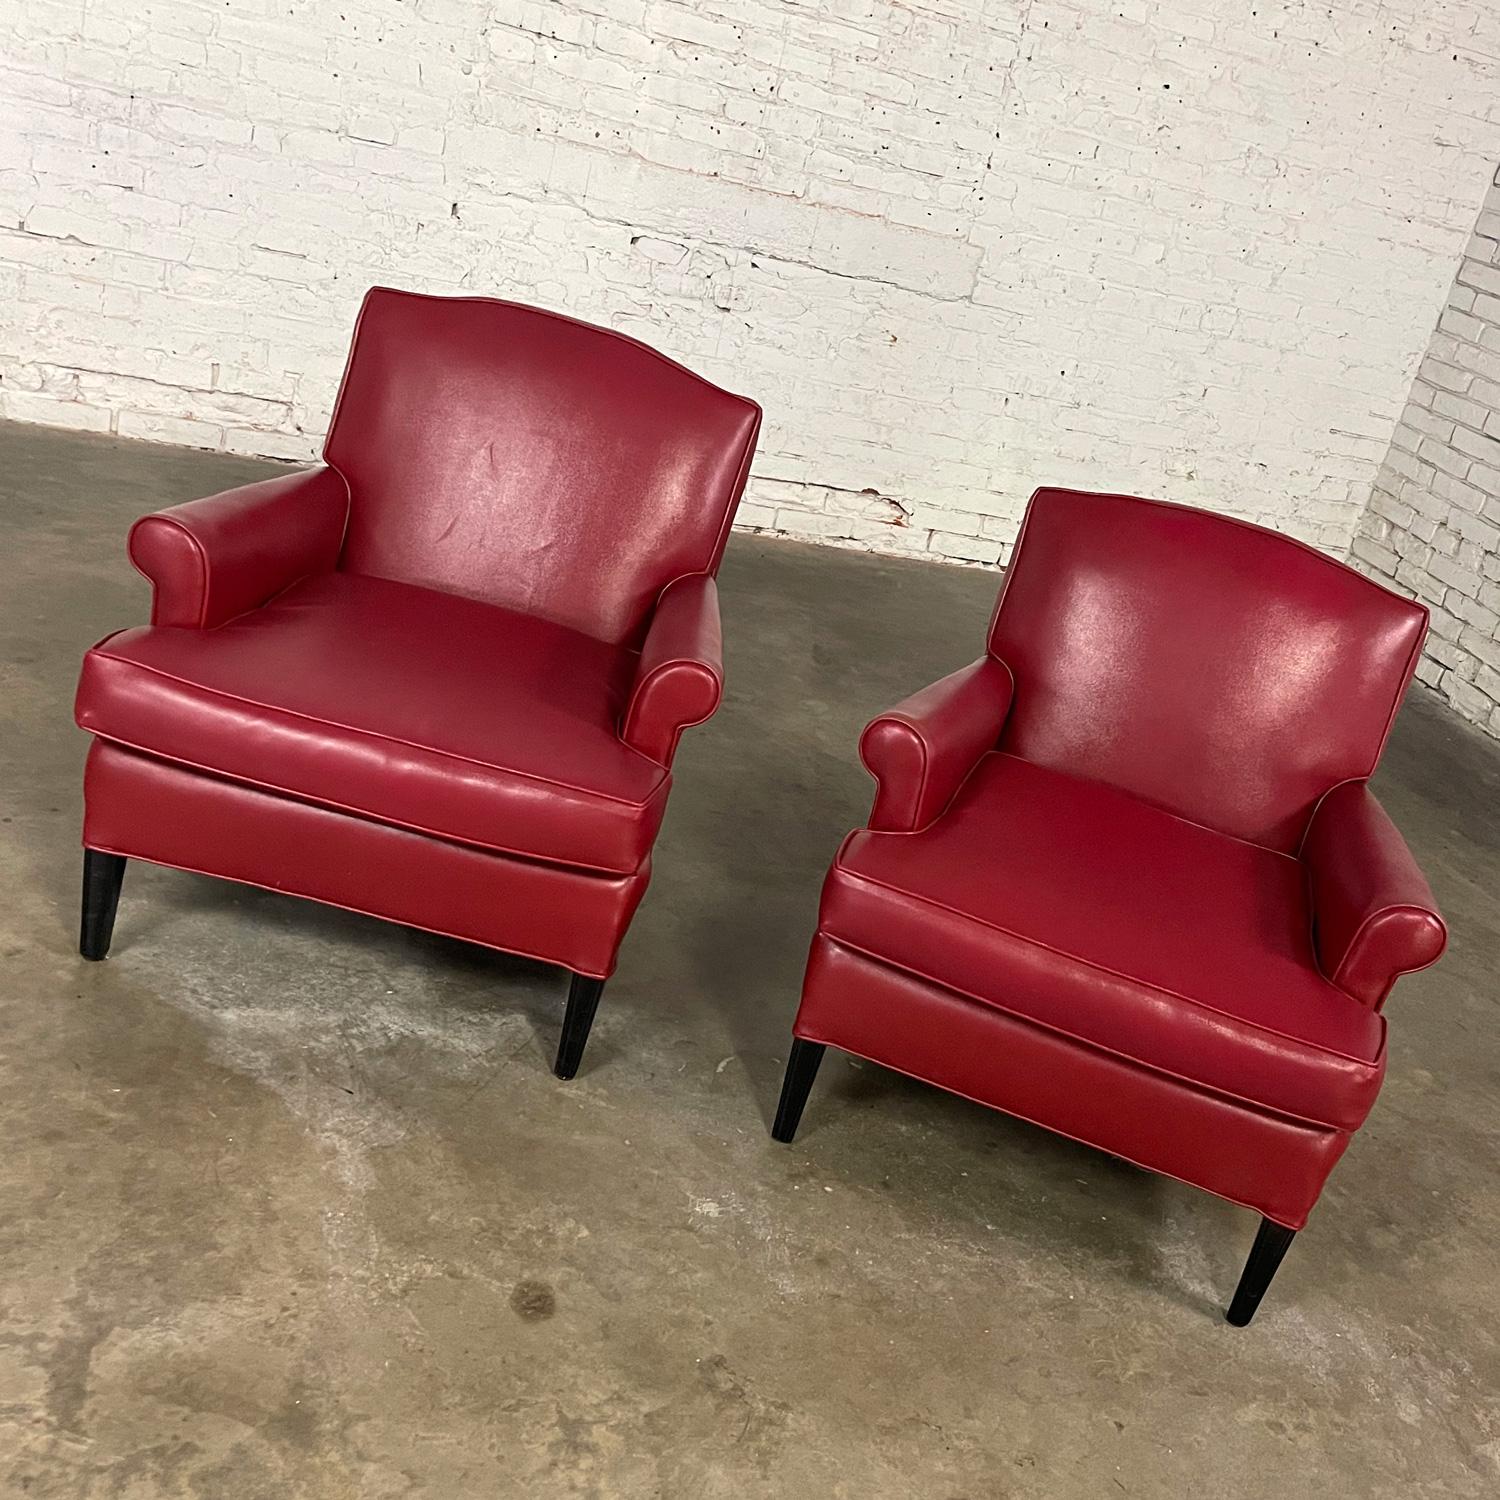 Gorgeous vintage Traditional club chairs with original faux leather or vinyl fabric and square tapered wood legs, a pair. Beautiful condition, keeping in mind that these are vintage and not new so will have signs of use and wear. The legs have been